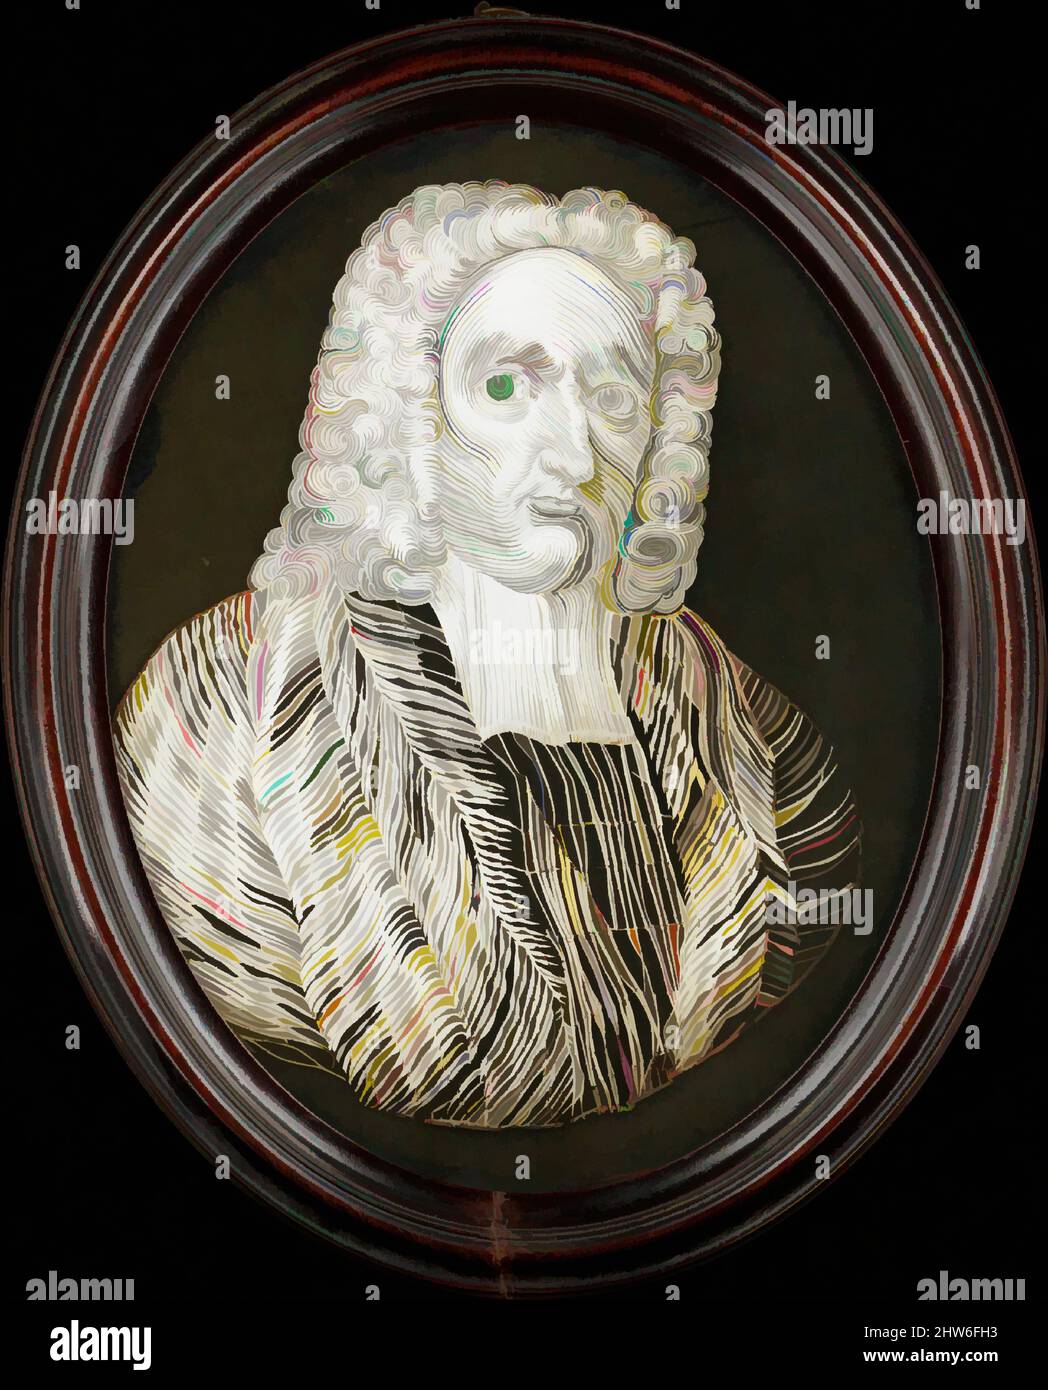 Art inspired by Portrait of Jonathan Swift, 1774, White cut paper, with pen and ink additions, mounted on black silk, framed, Overall: 13 7/16 x 11 in. (34.2 x 28 cm), Cut Paper, Nathaniel Bermingham (Irish, born ca. 1720, active mainly London, 1736–74, Classic works modernized by Artotop with a splash of modernity. Shapes, color and value, eye-catching visual impact on art. Emotions through freedom of artworks in a contemporary way. A timeless message pursuing a wildly creative new direction. Artists turning to the digital medium and creating the Artotop NFT Stock Photo